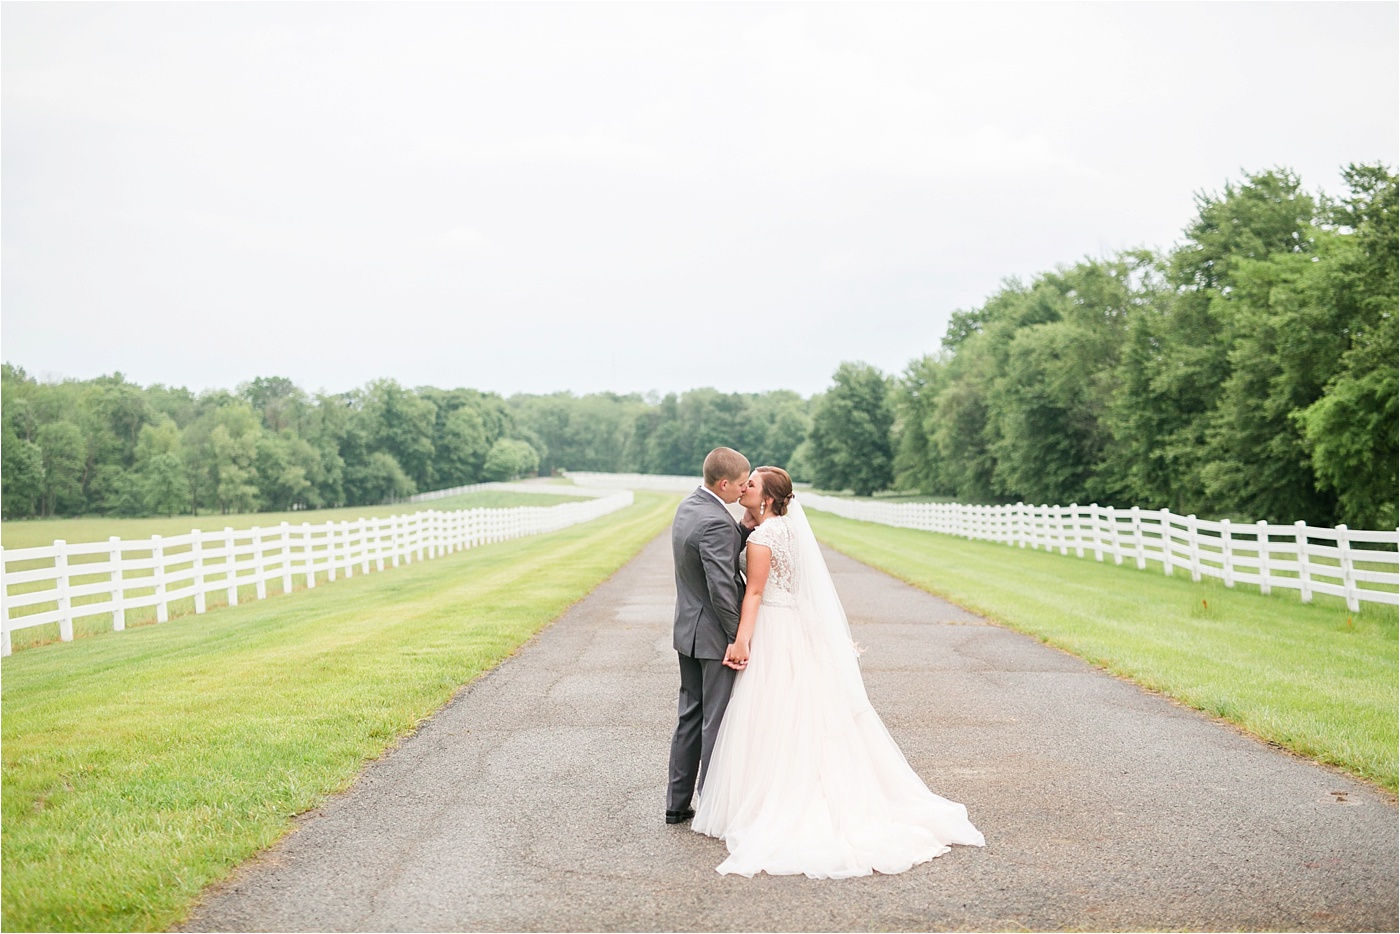 A Blush Outdoor wedding at Irongate Equestrian | KariMe Photography_0125